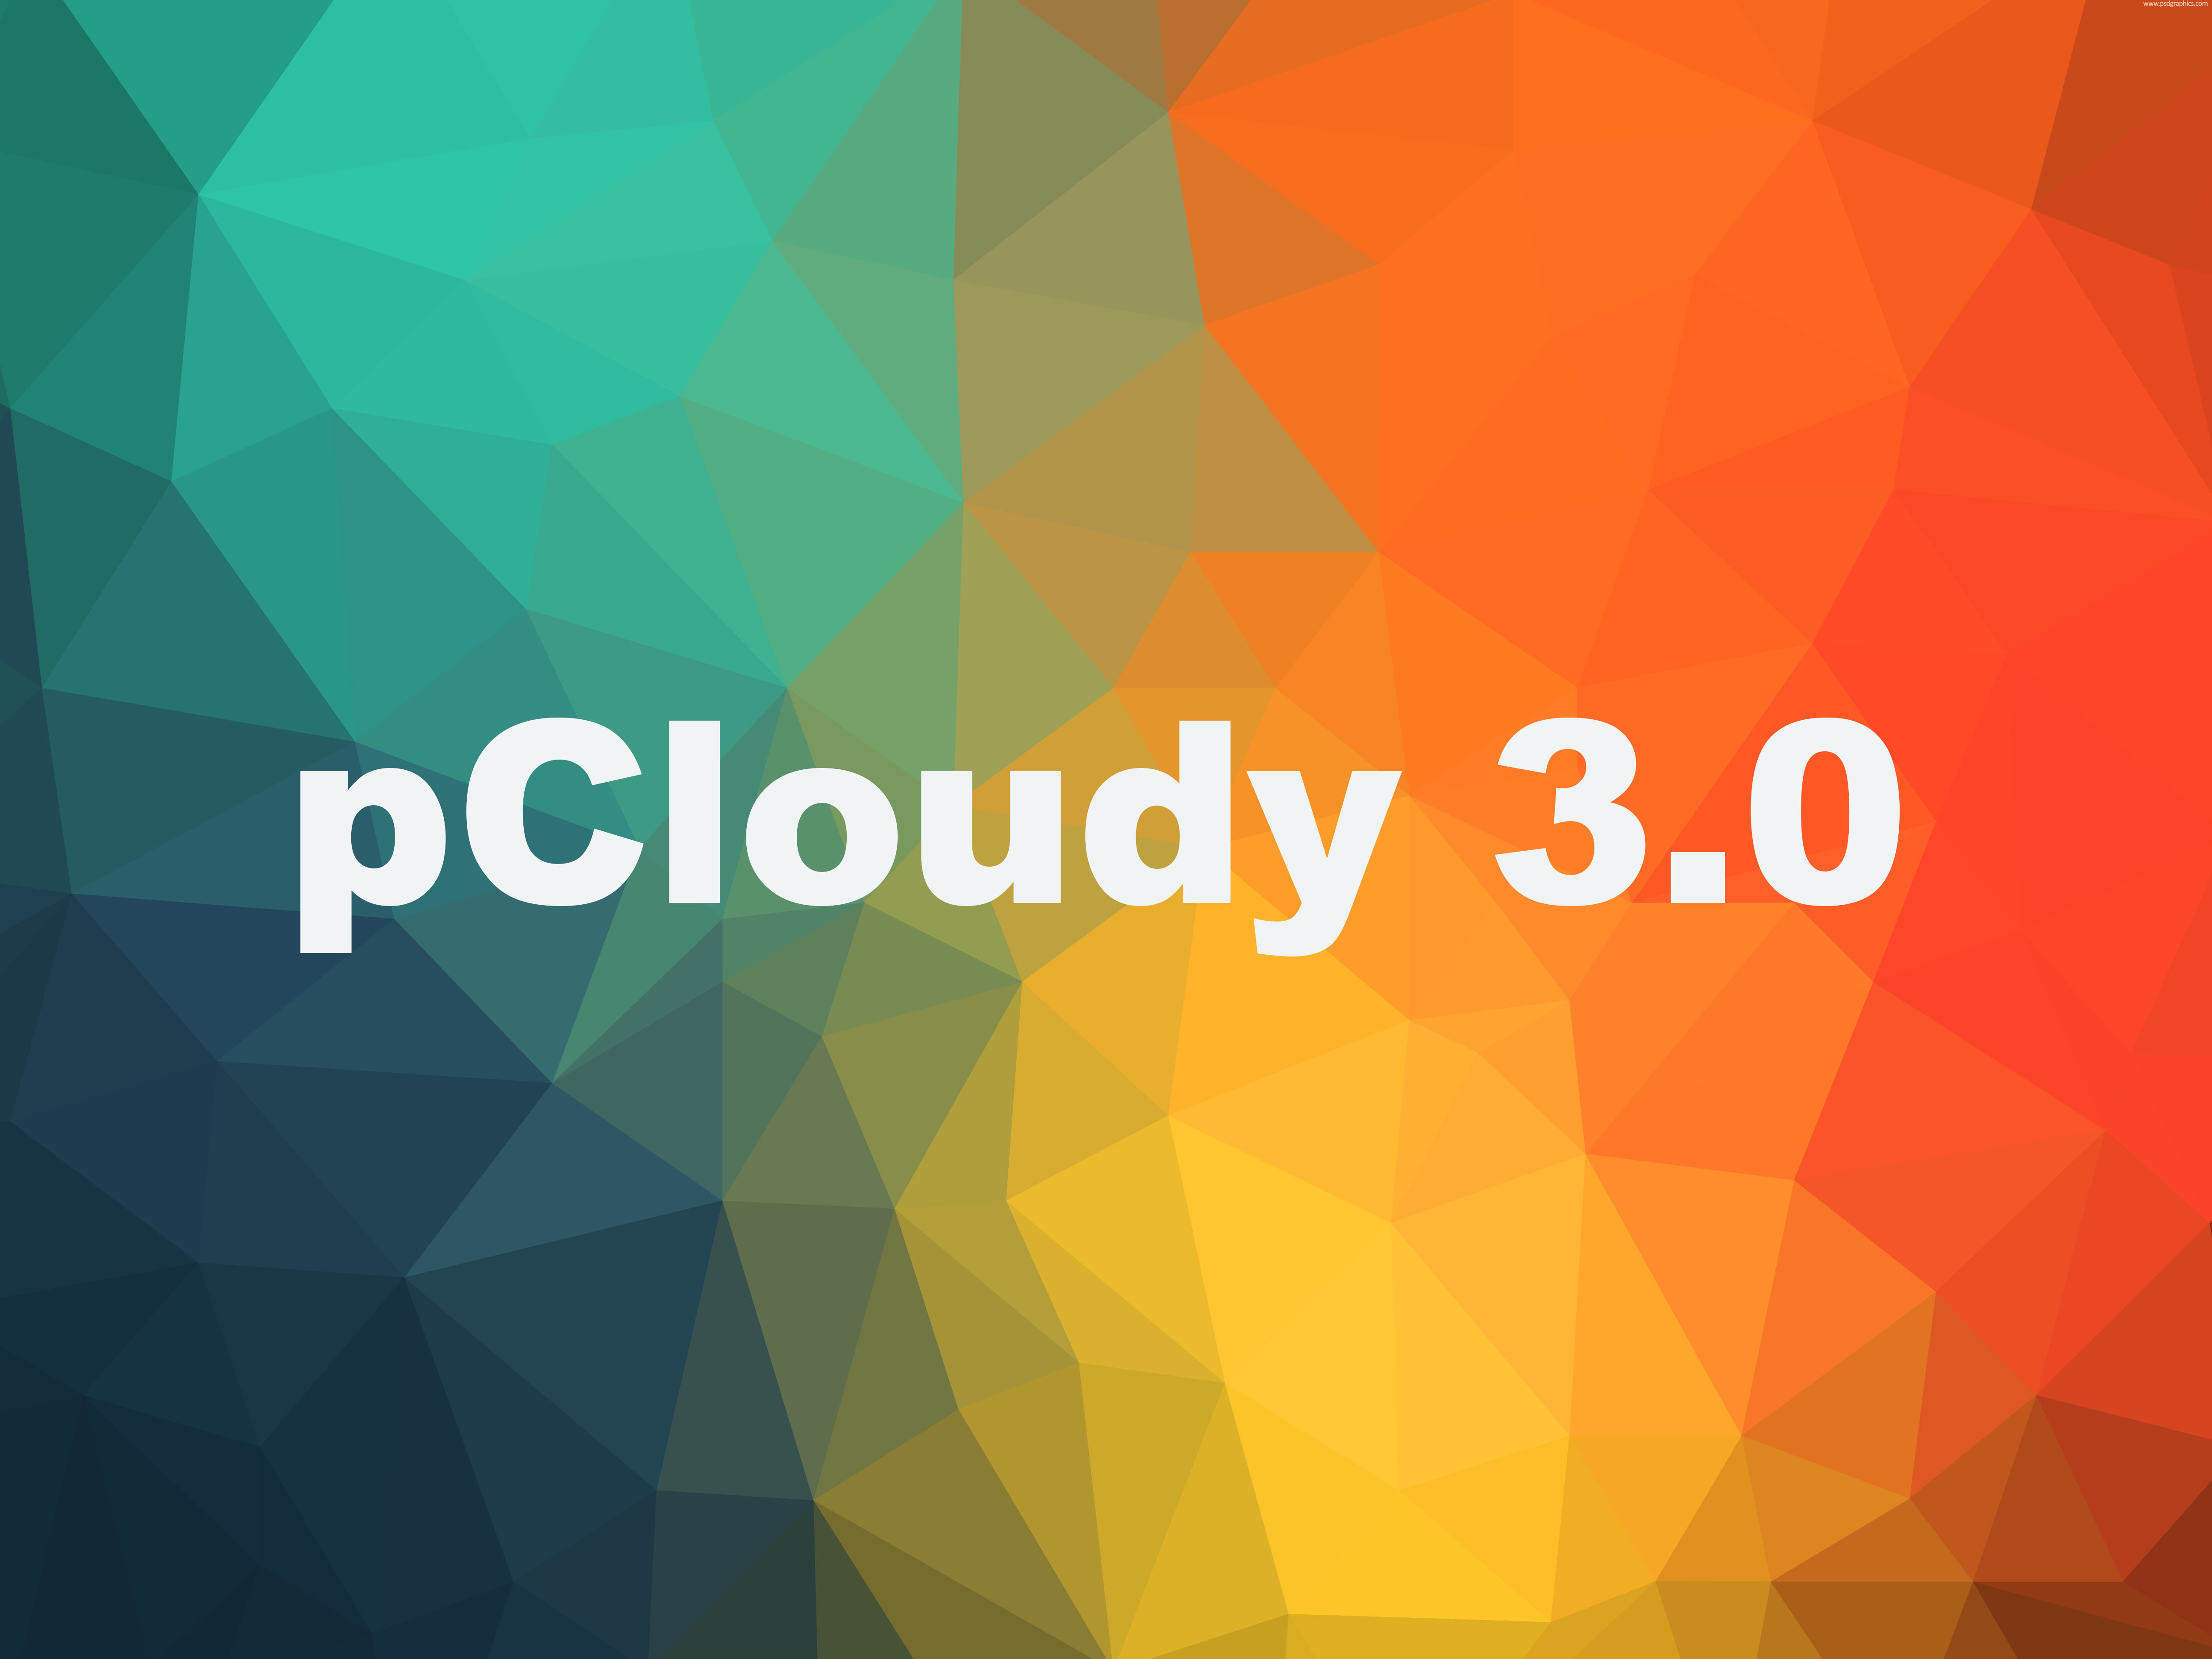 pCloudy 3.0